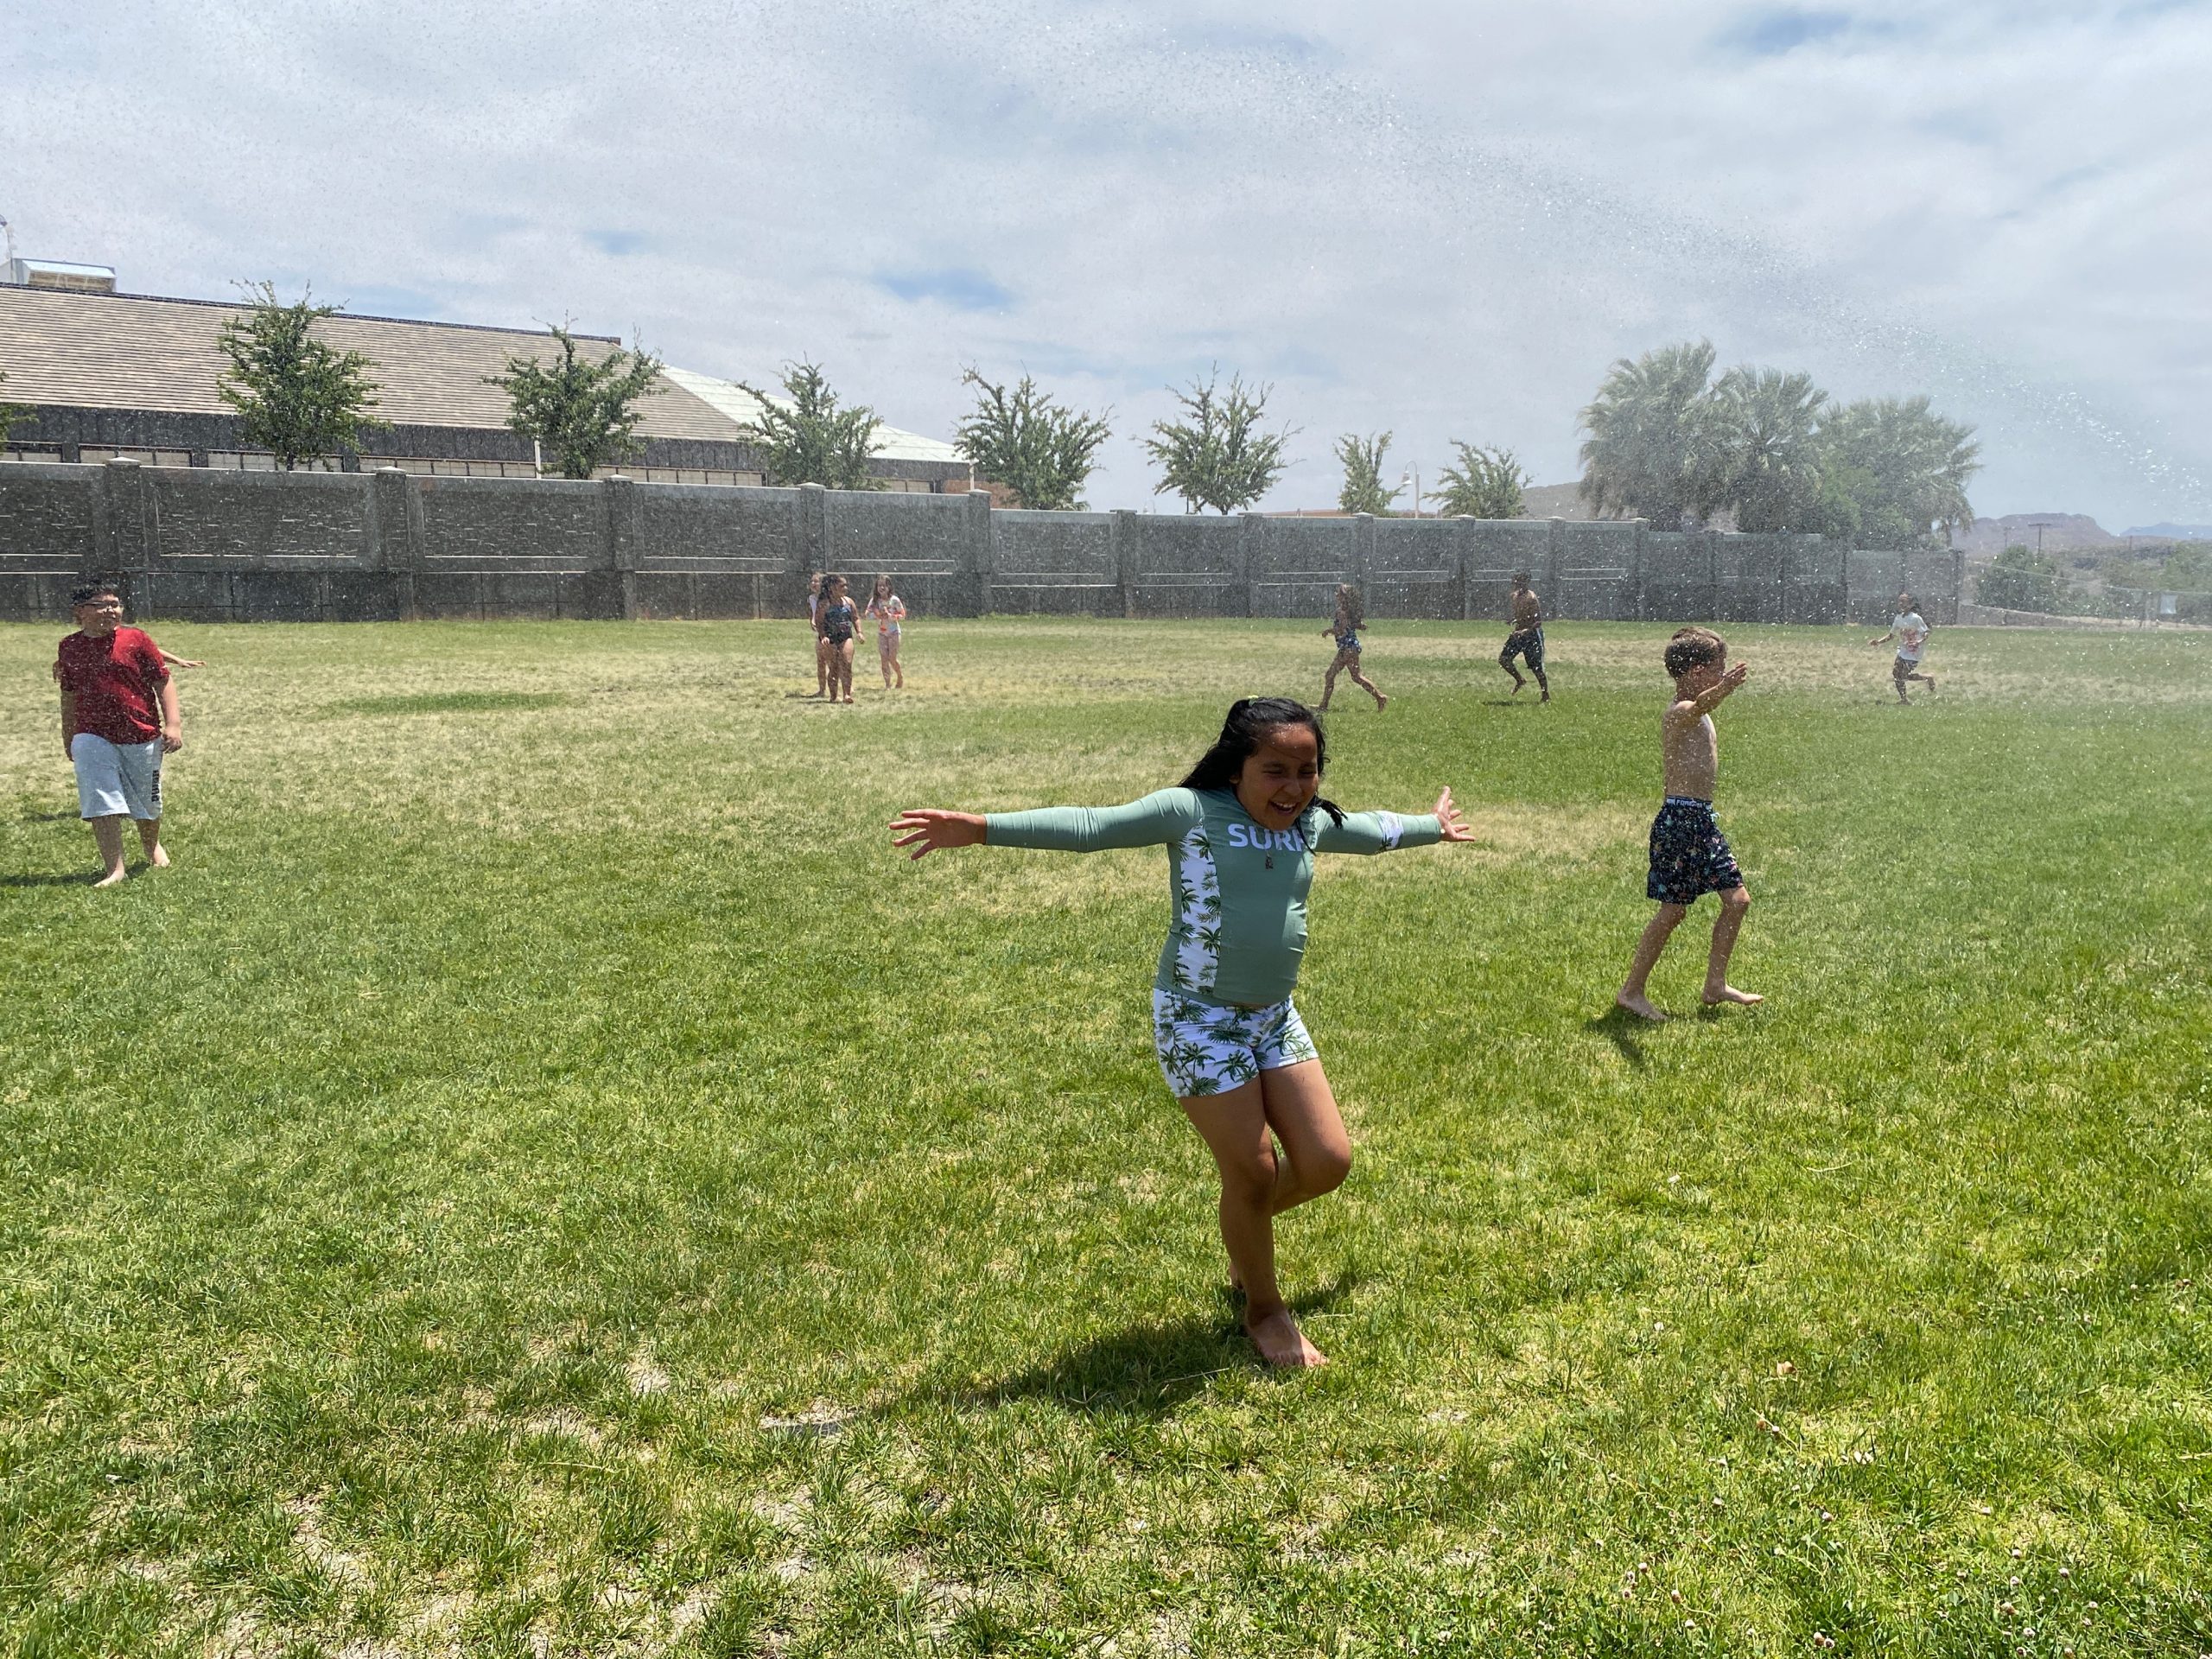 Students having fun playing in the sprinklers on the field